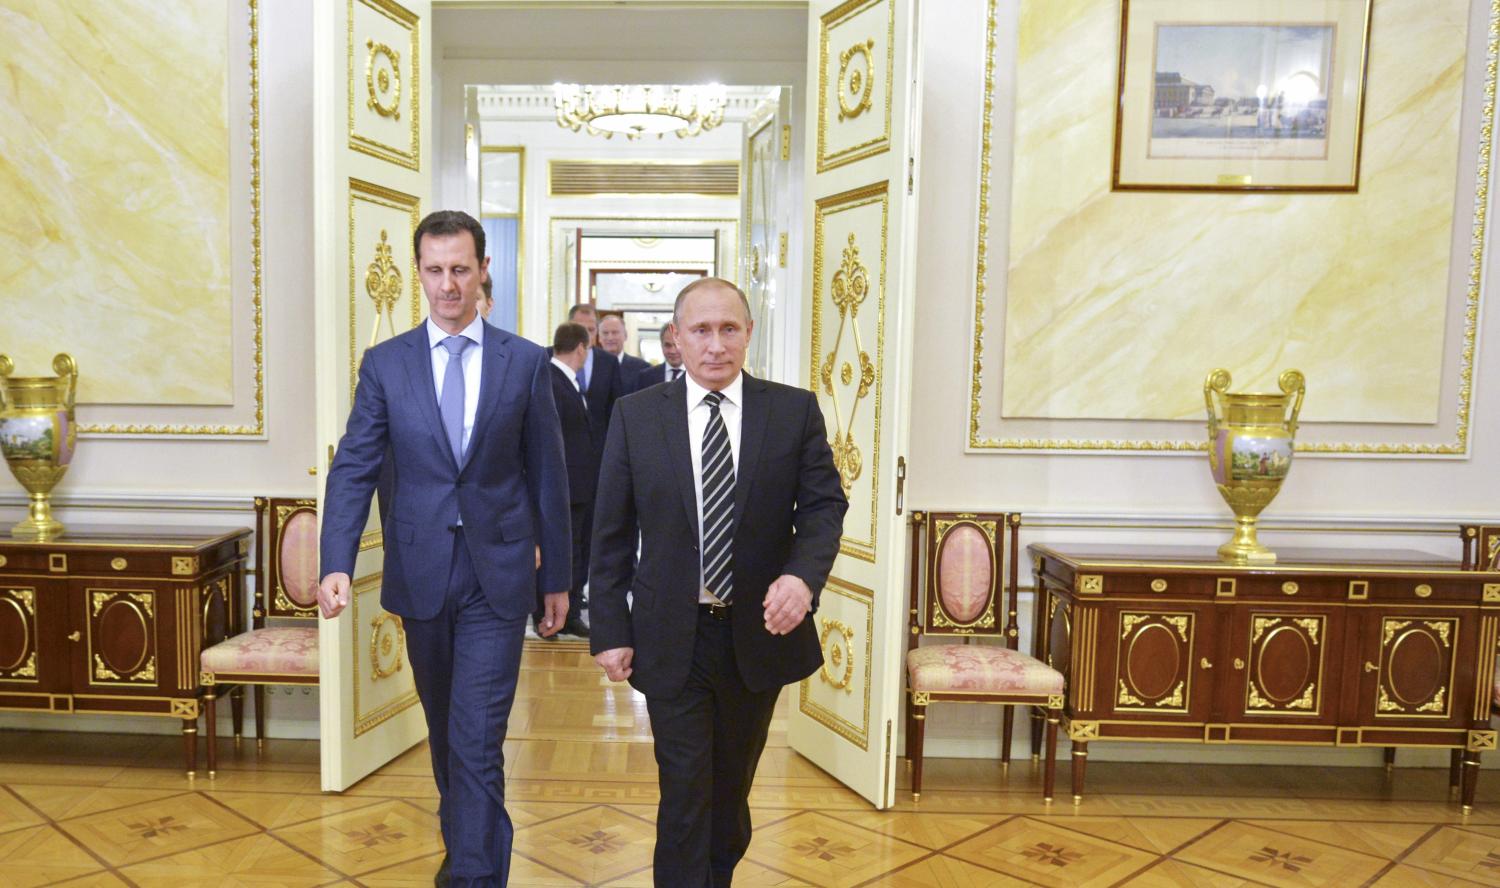 Russian President Vladimir Putin (R) and Syrian President Bashar al-Assad enter a hall during a meeting at the Kremlin in Moscow, Russia, October 20, 2015. Assad made a surprise visit to Moscow on Tuesday evening to thank Putin for launching air strikes against Islamist militants in Syria. Picture taken October 20, 2015. REUTERS/Alexei Druzhinin/RIA Novosti/Kremlin ATTENTION EDITORS - THIS IMAGE HAS BEEN SUPPLIED BY A THIRD PARTY. IT IS DISTRIBUTED, EXACTLY AS RECEIVED BY REUTERS, AS A SERVICE TO CLIENTS. - RTS5E2Z